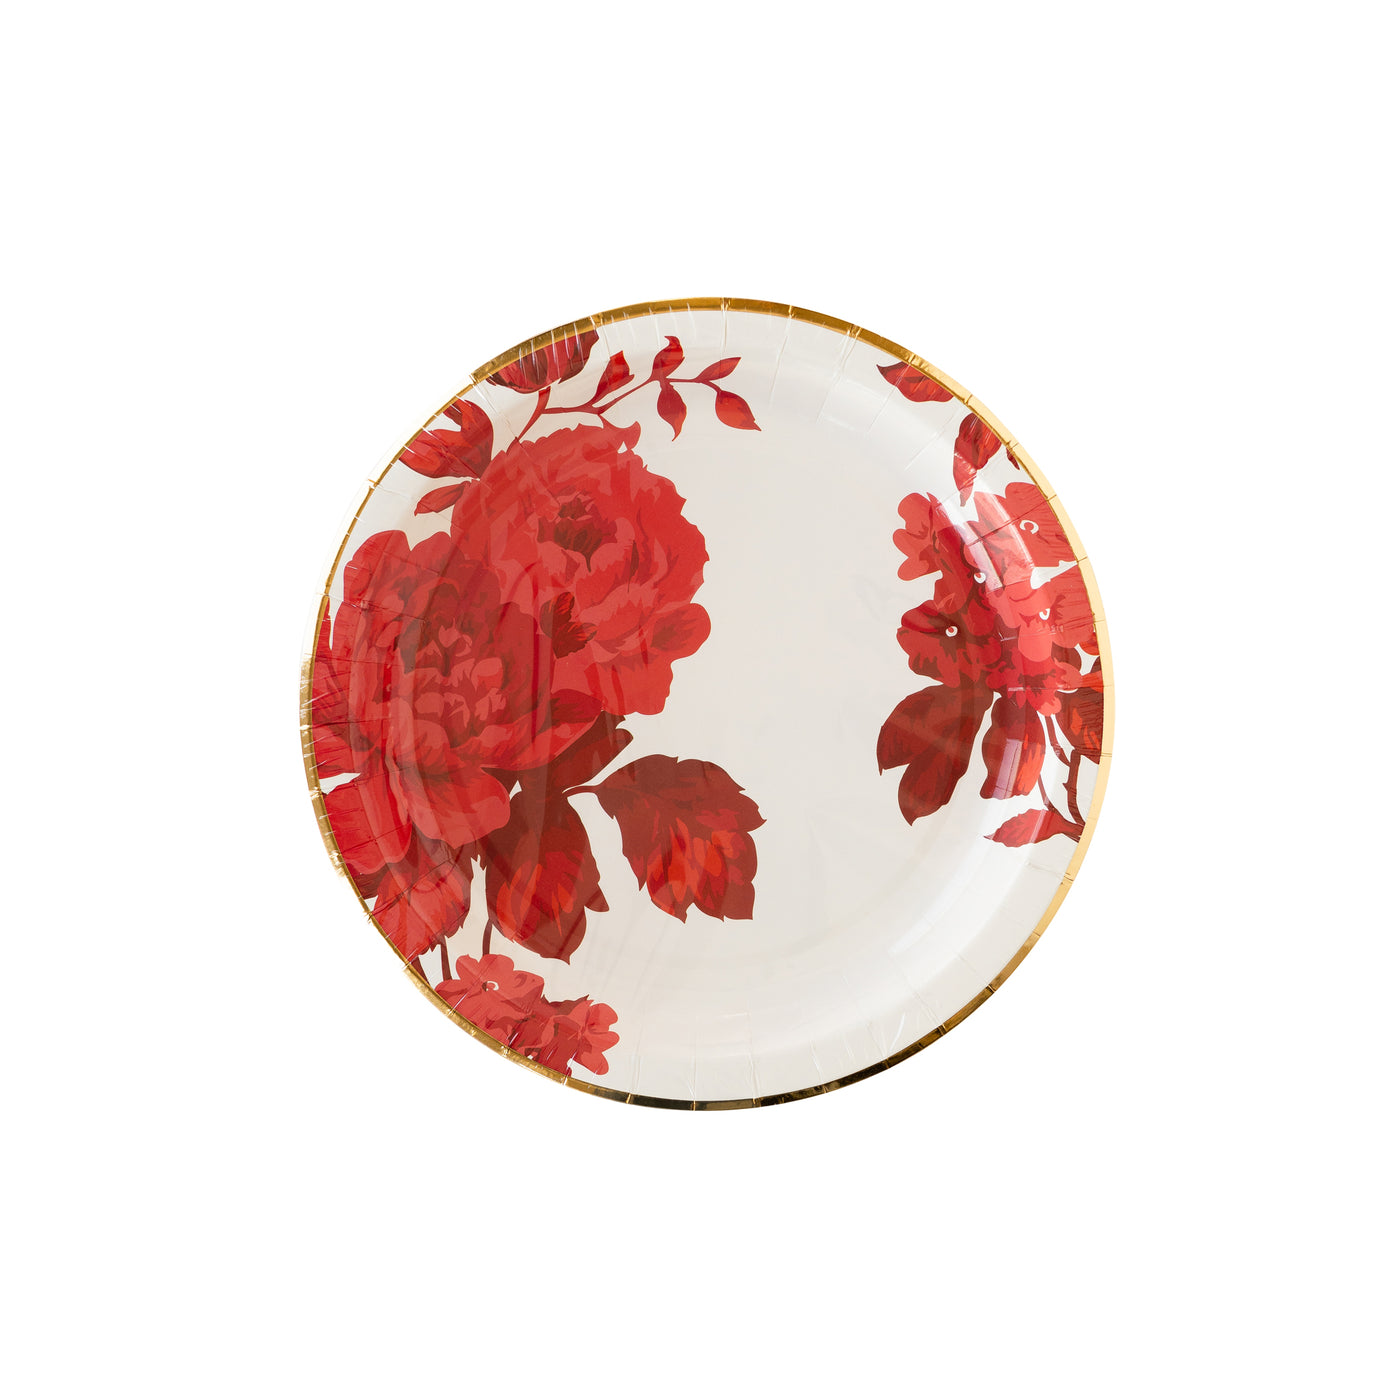 Floral Paper Plate